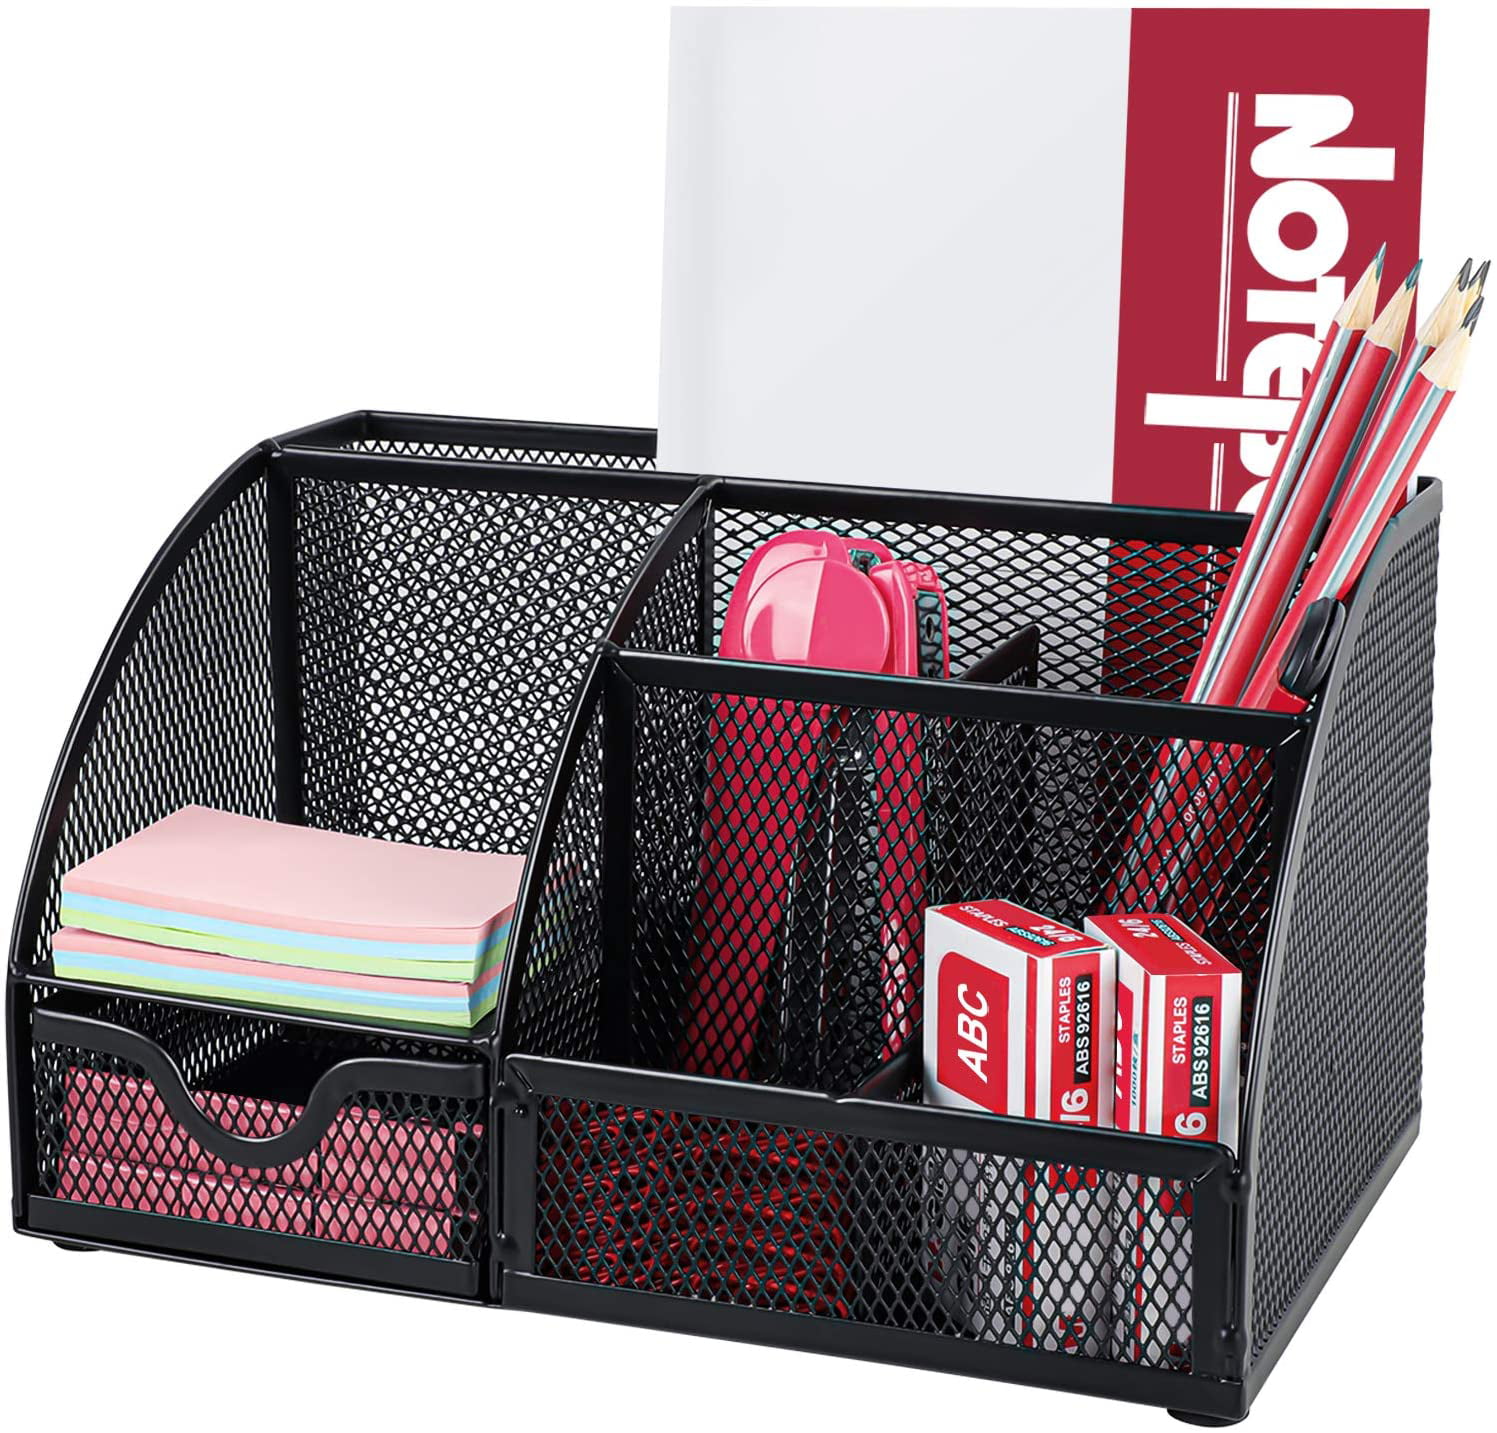 Multifunctional Office Accessories Mesh Office Supplies Desk Organizer Caddy with 6 Compartments for Home Office ,School - image 1 of 7